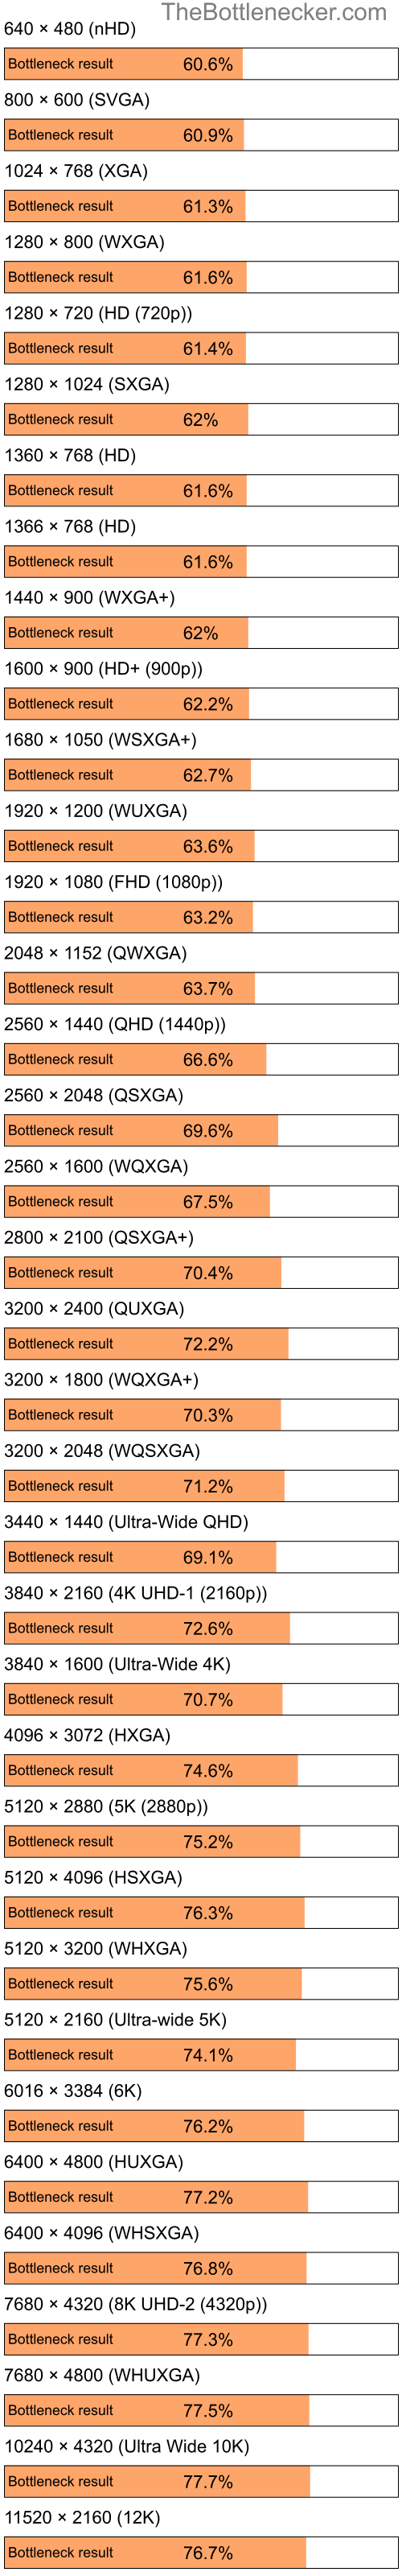 Bottleneck results by resolution for Intel Pentium 4 and AMD Radeon HD 4270 in General Tasks